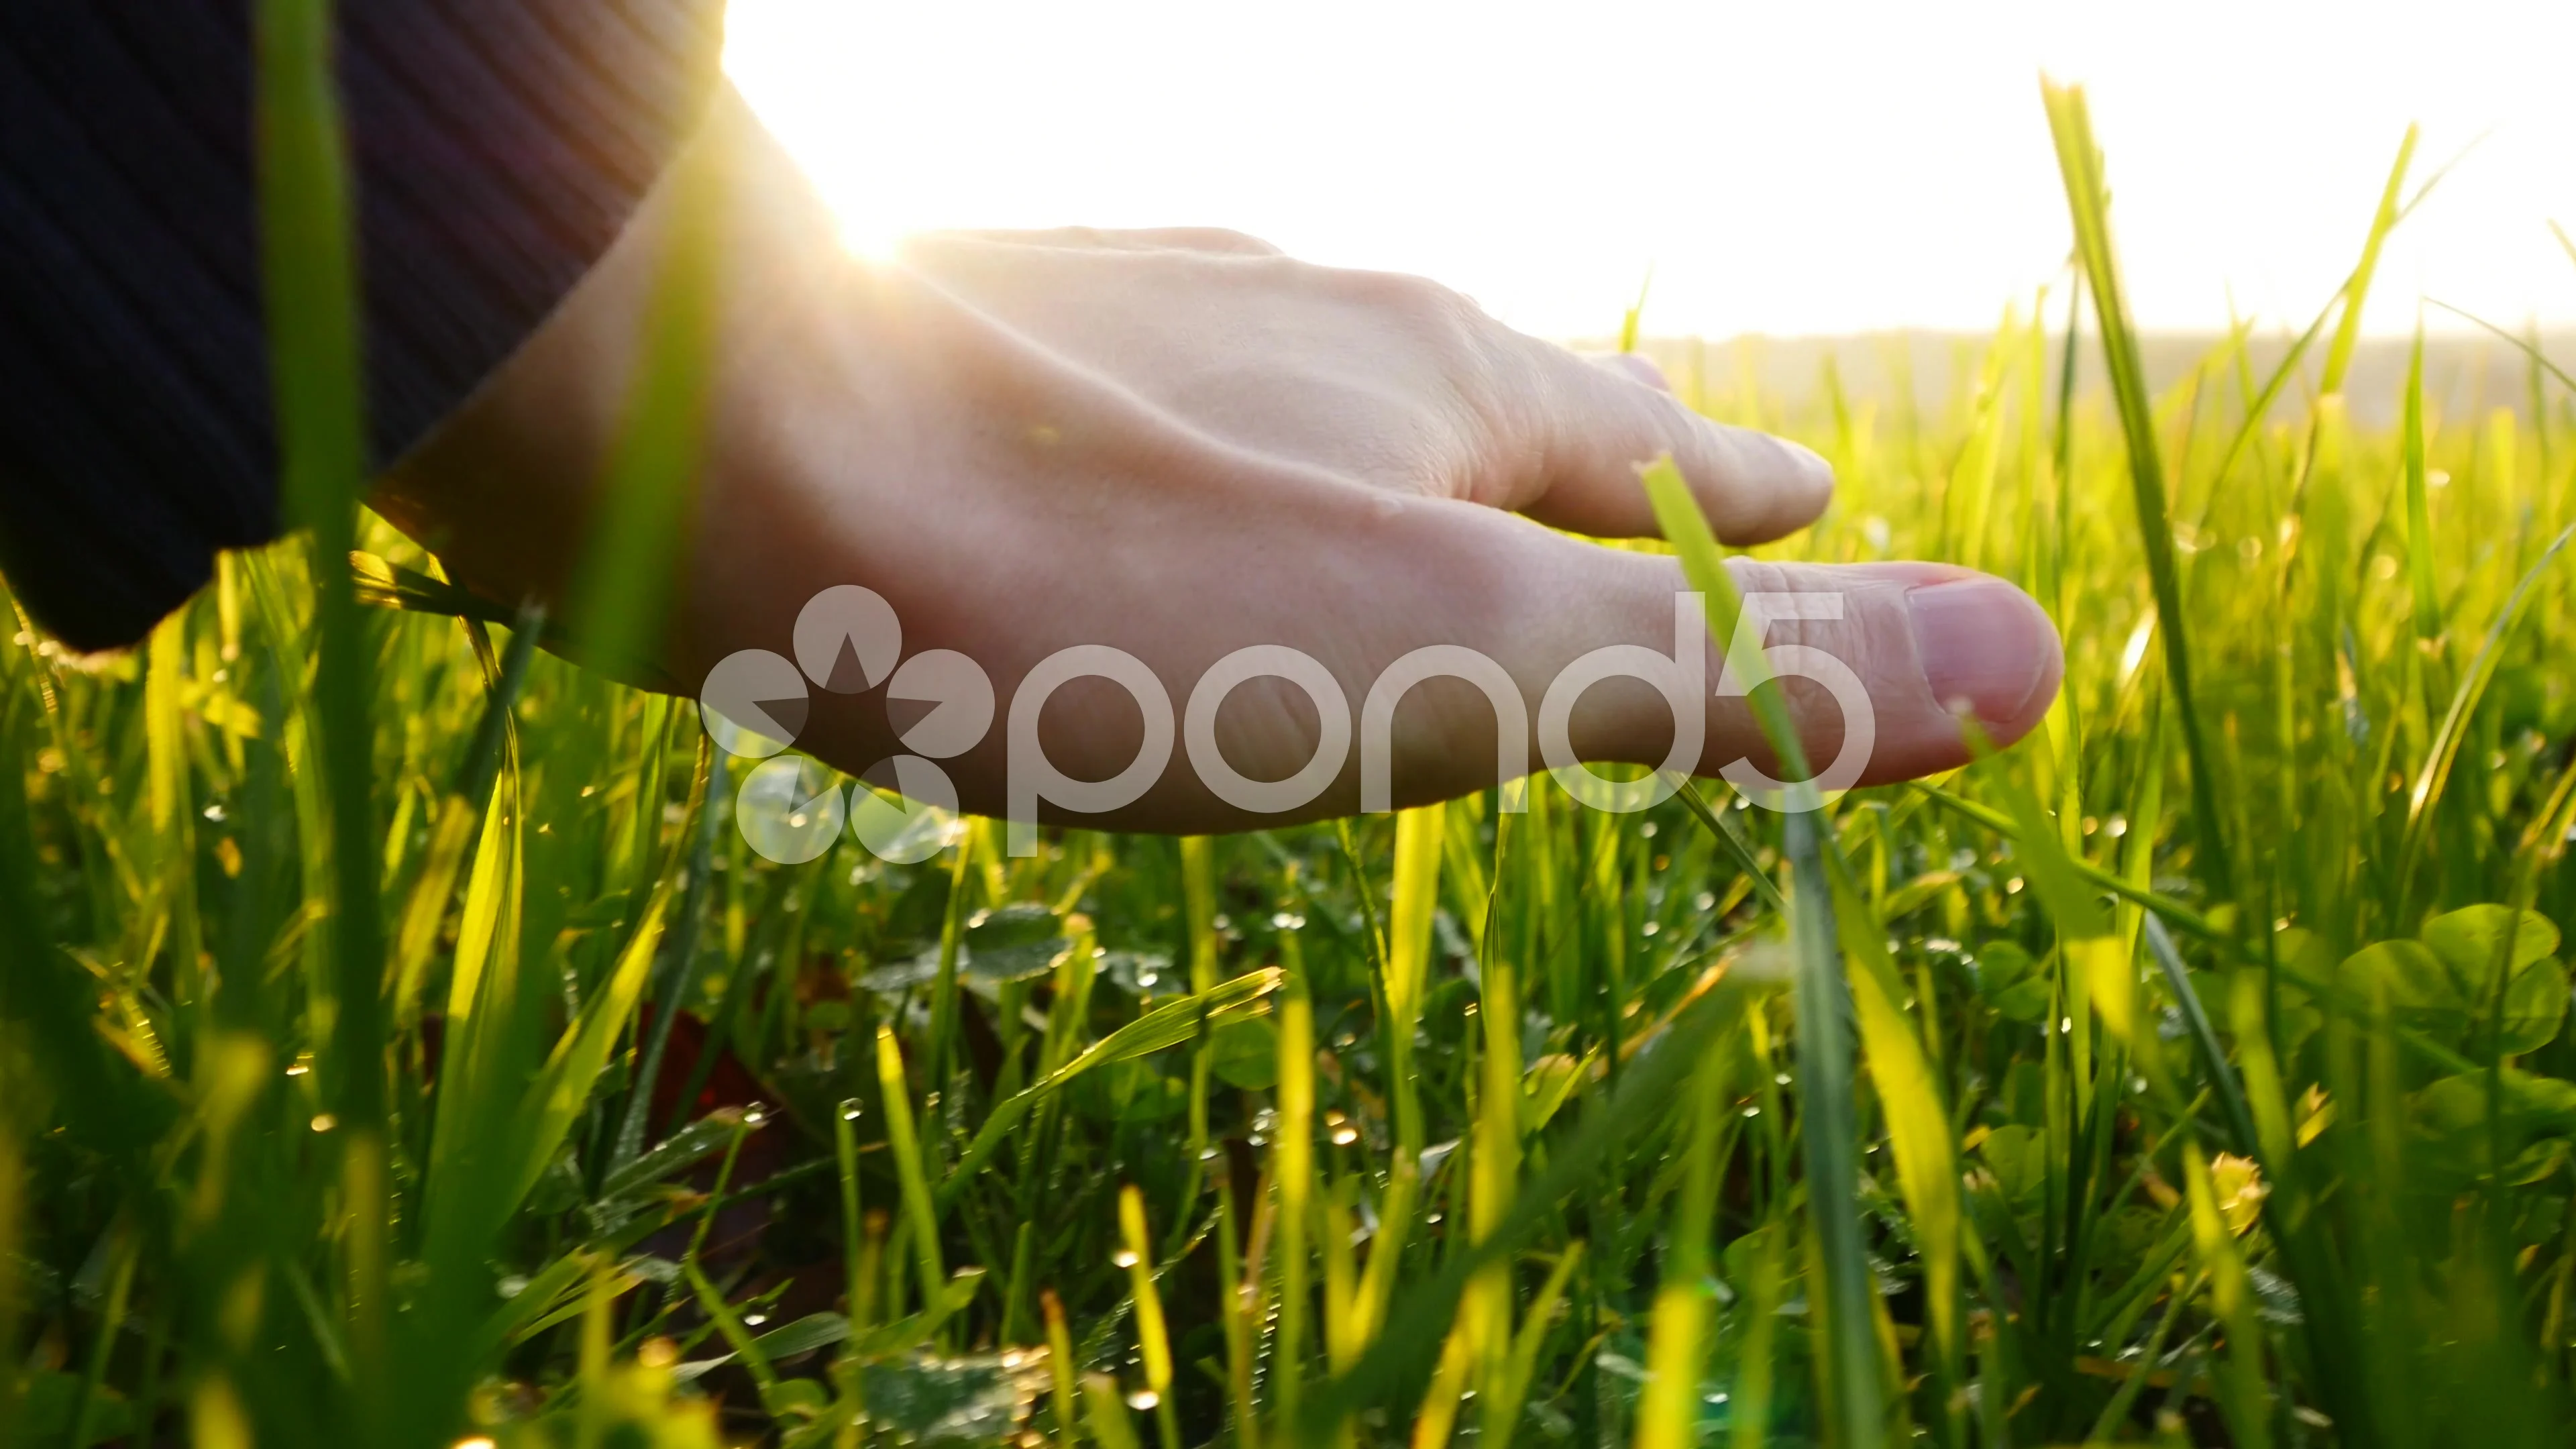 Person touching grass in the daytime